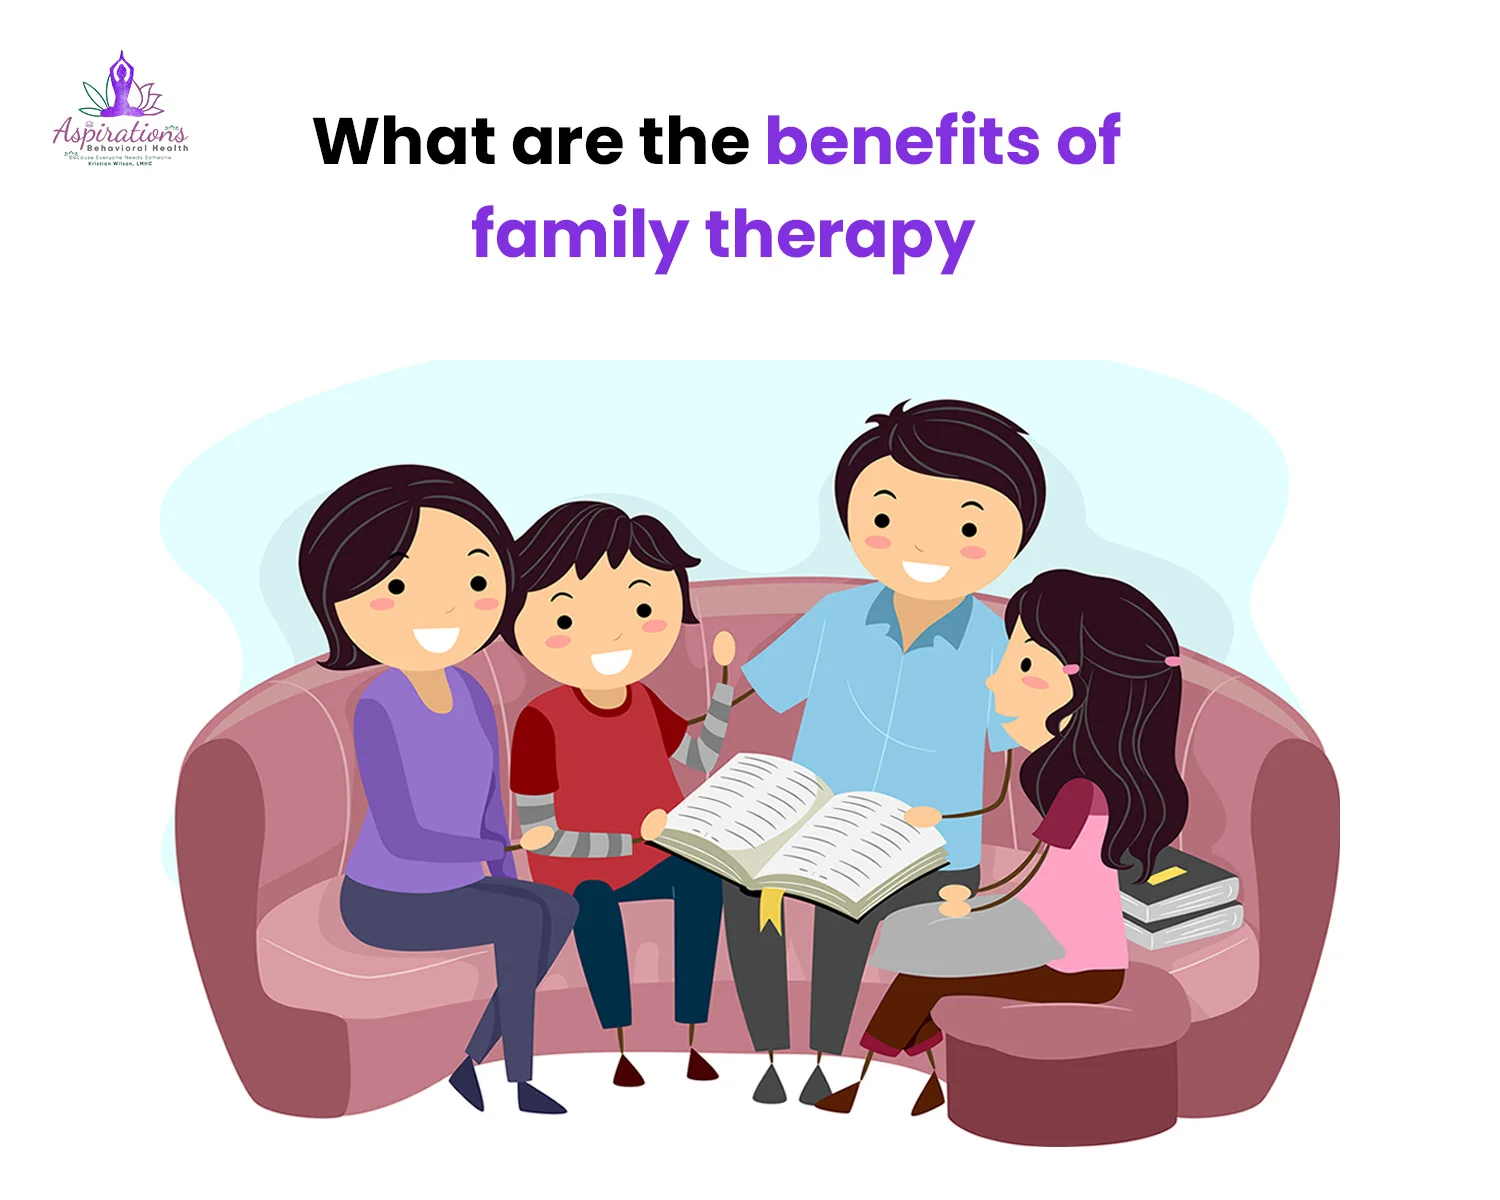 What are the benefits of family therapy?